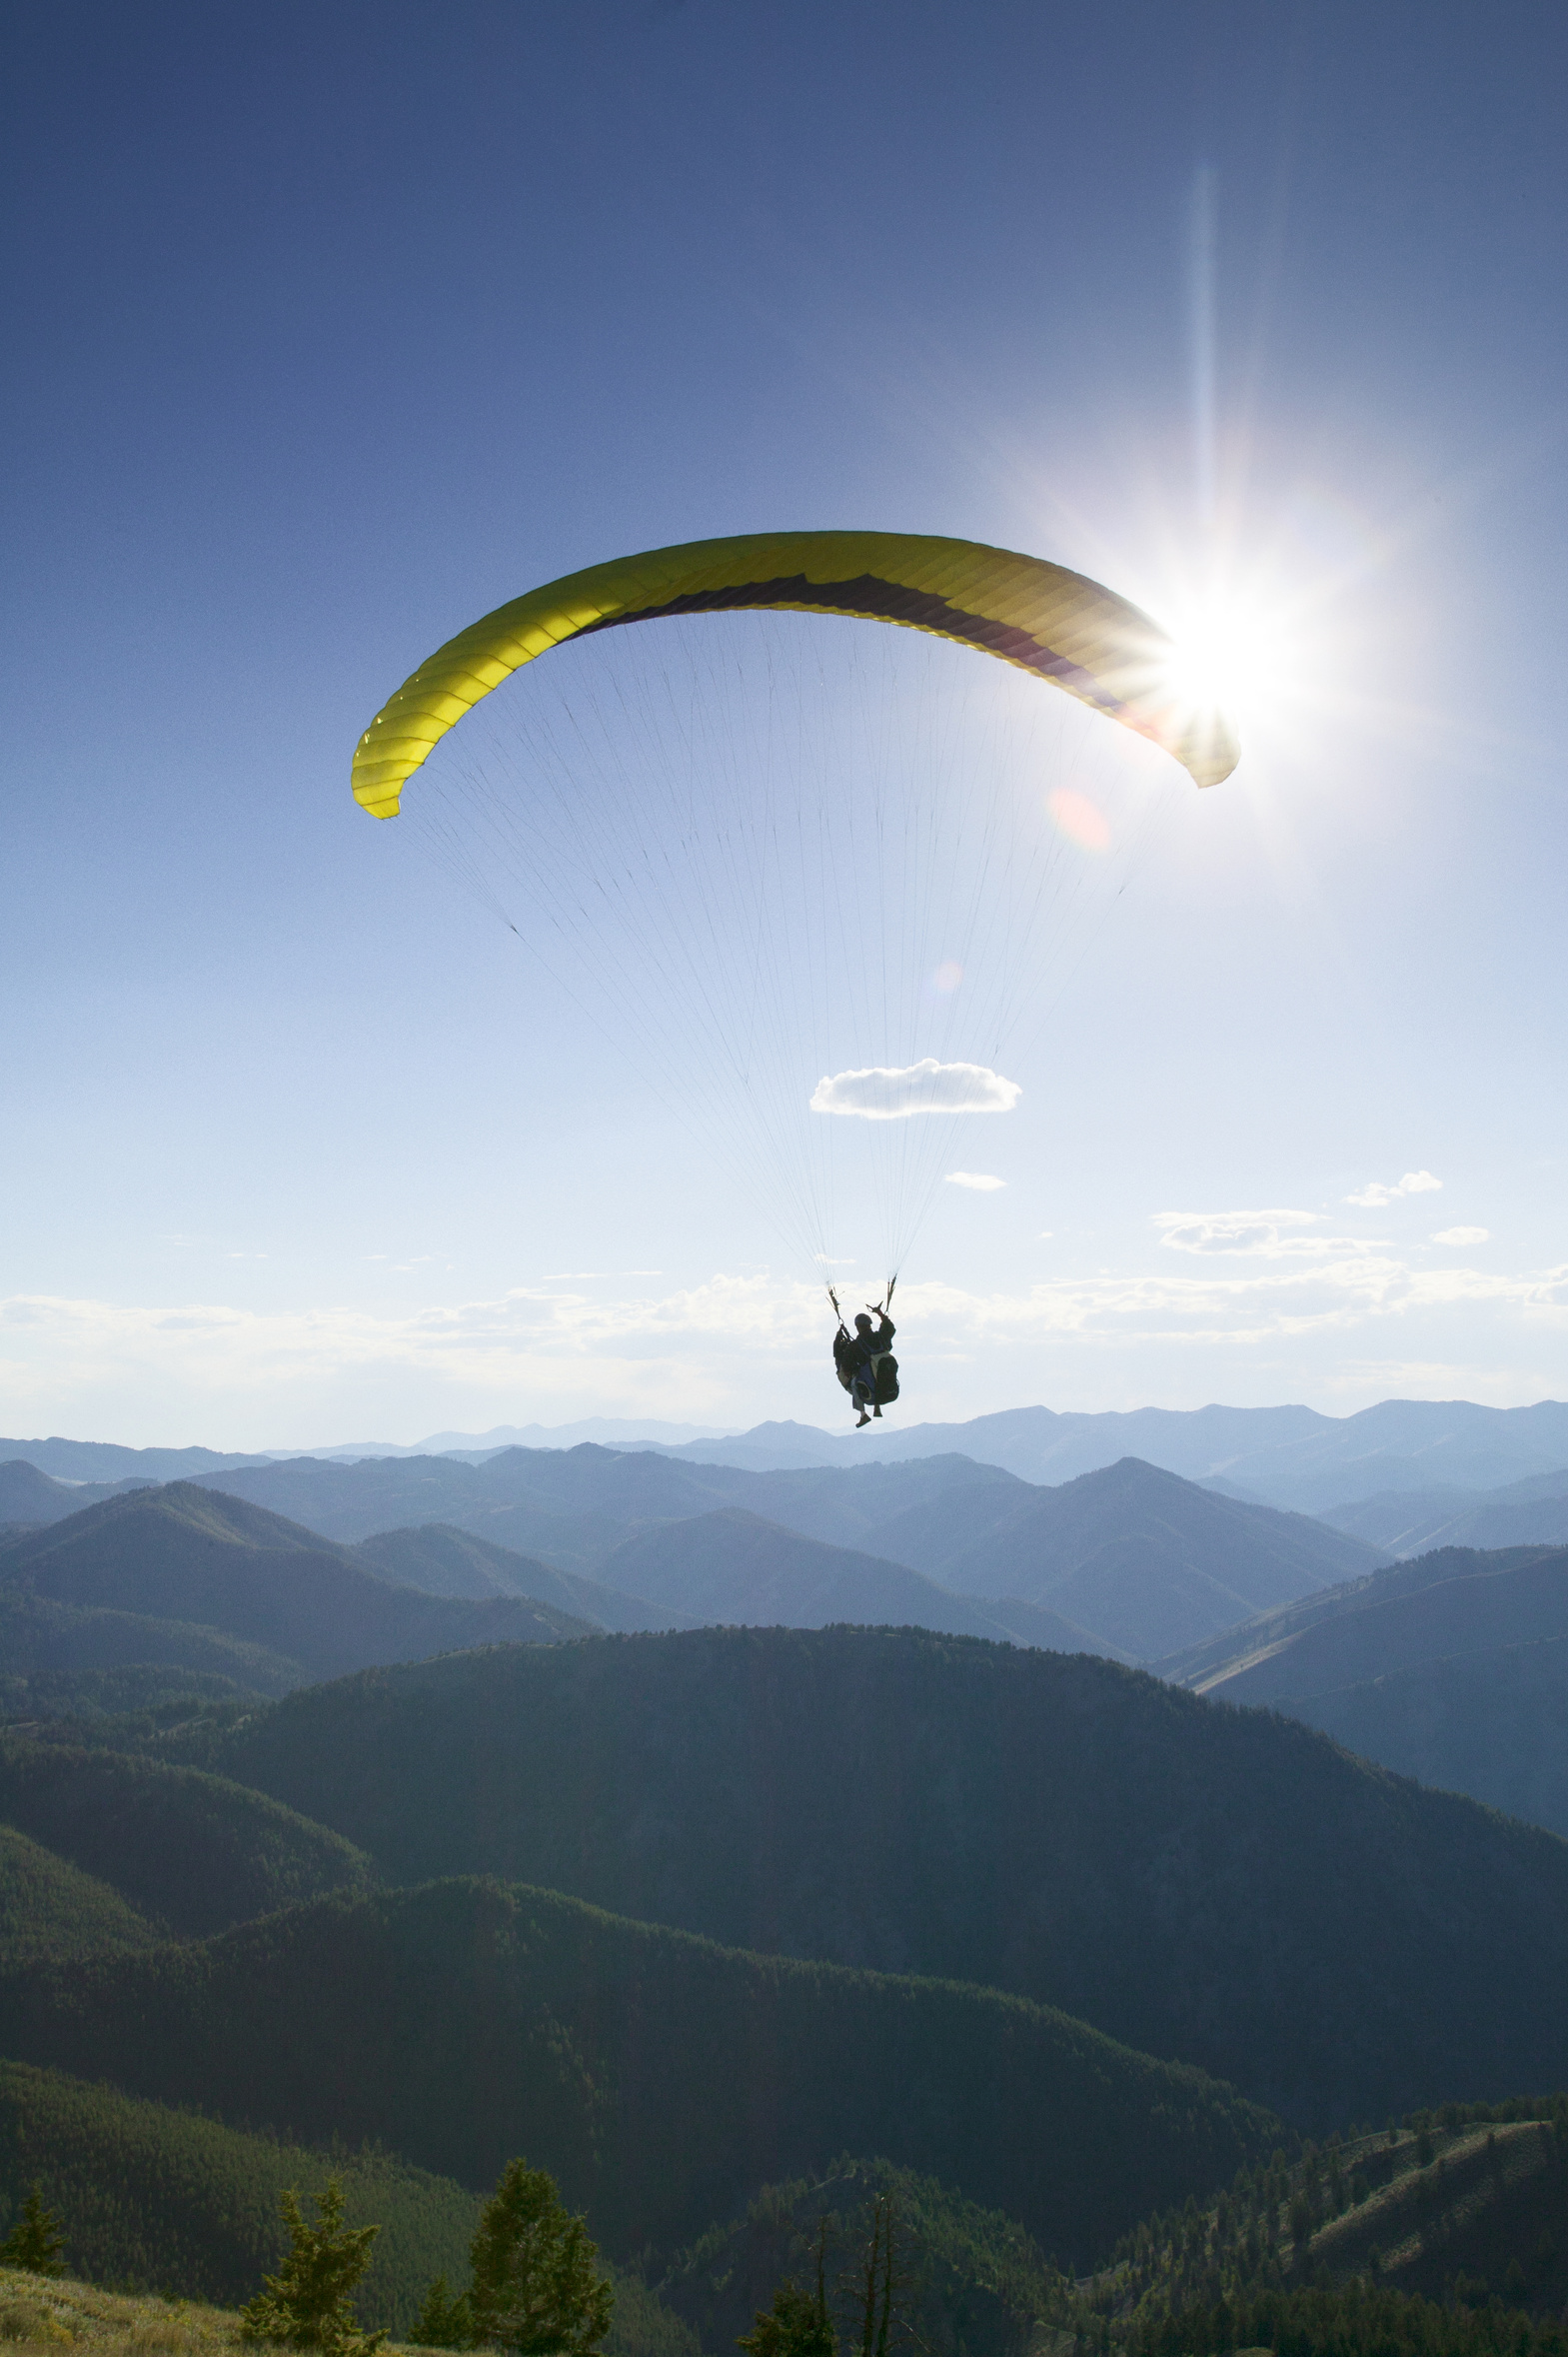 Silhouette person paragliding over mountains against bright sky